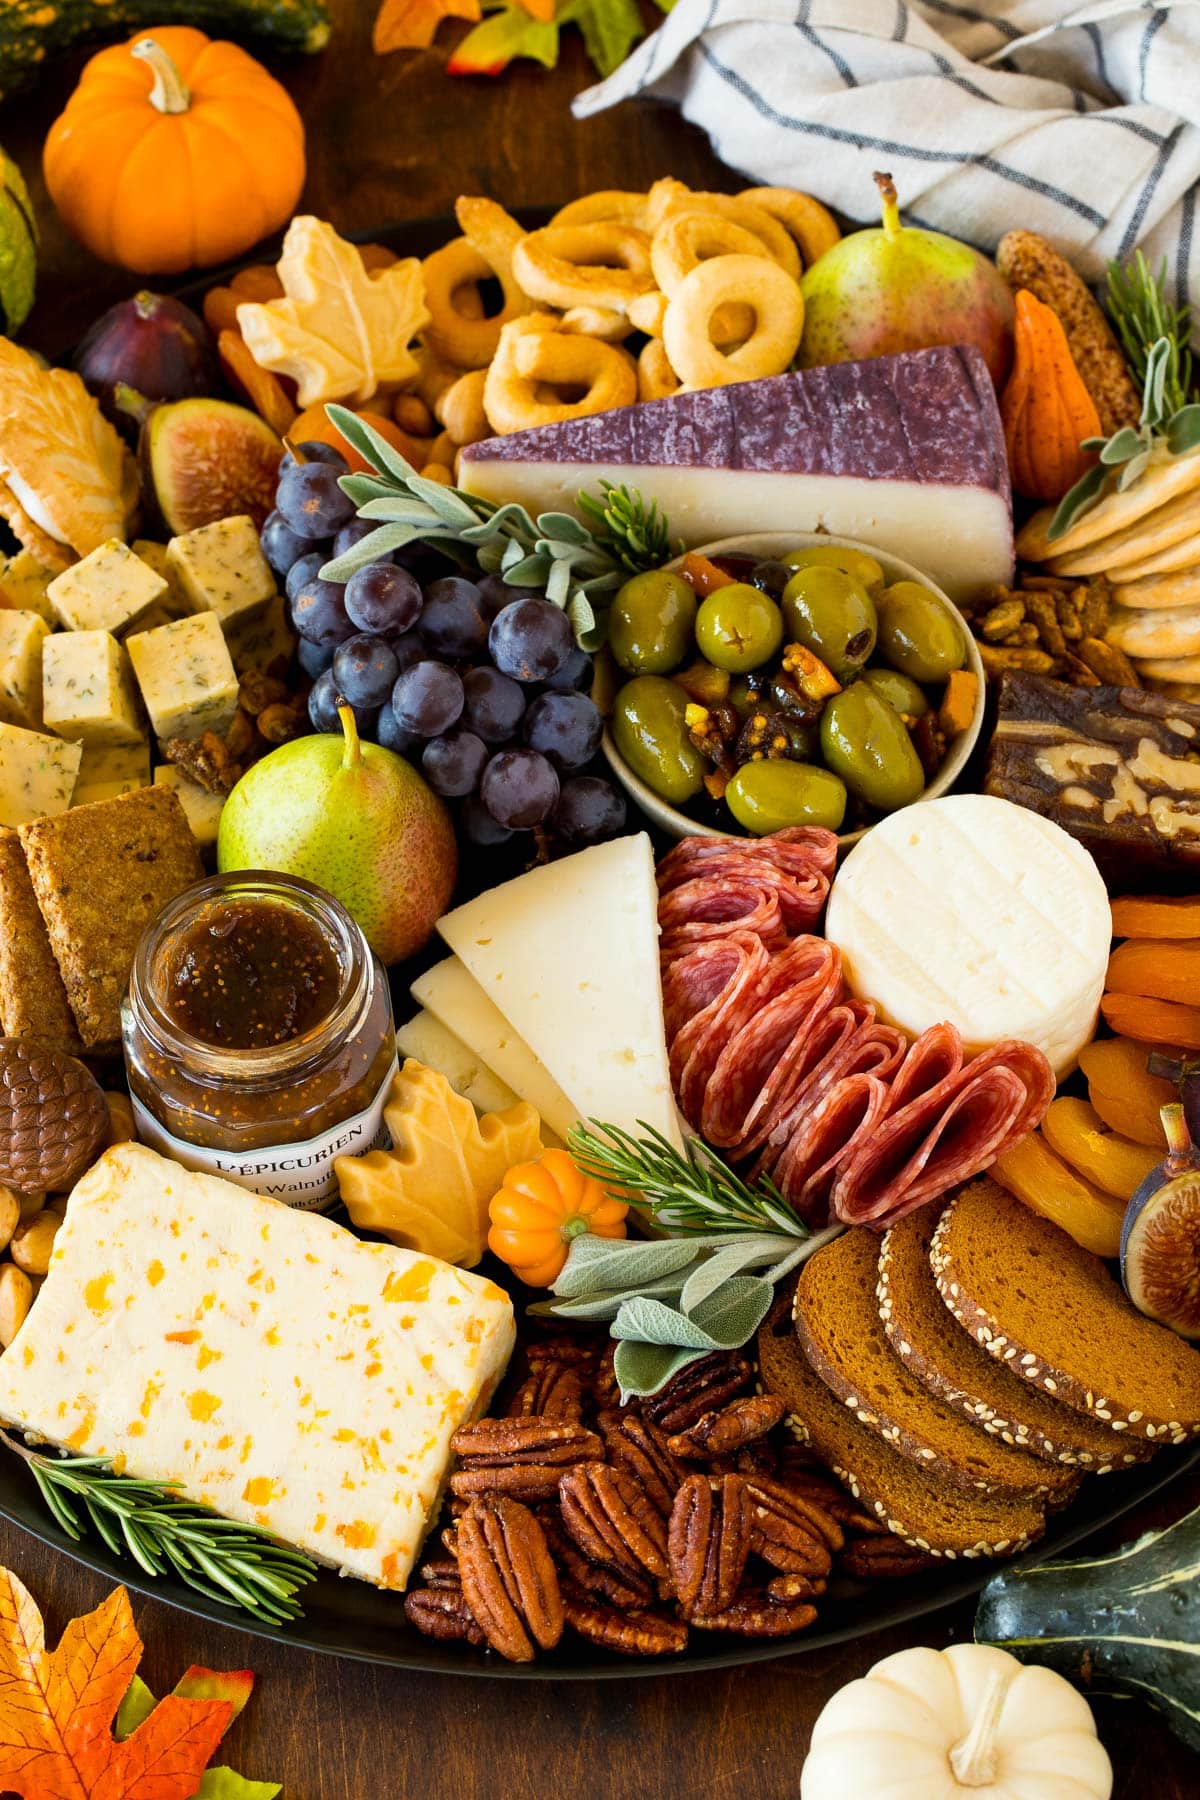 A Thanksgiving charcuterie board with meats, cheeses and fall fruit.